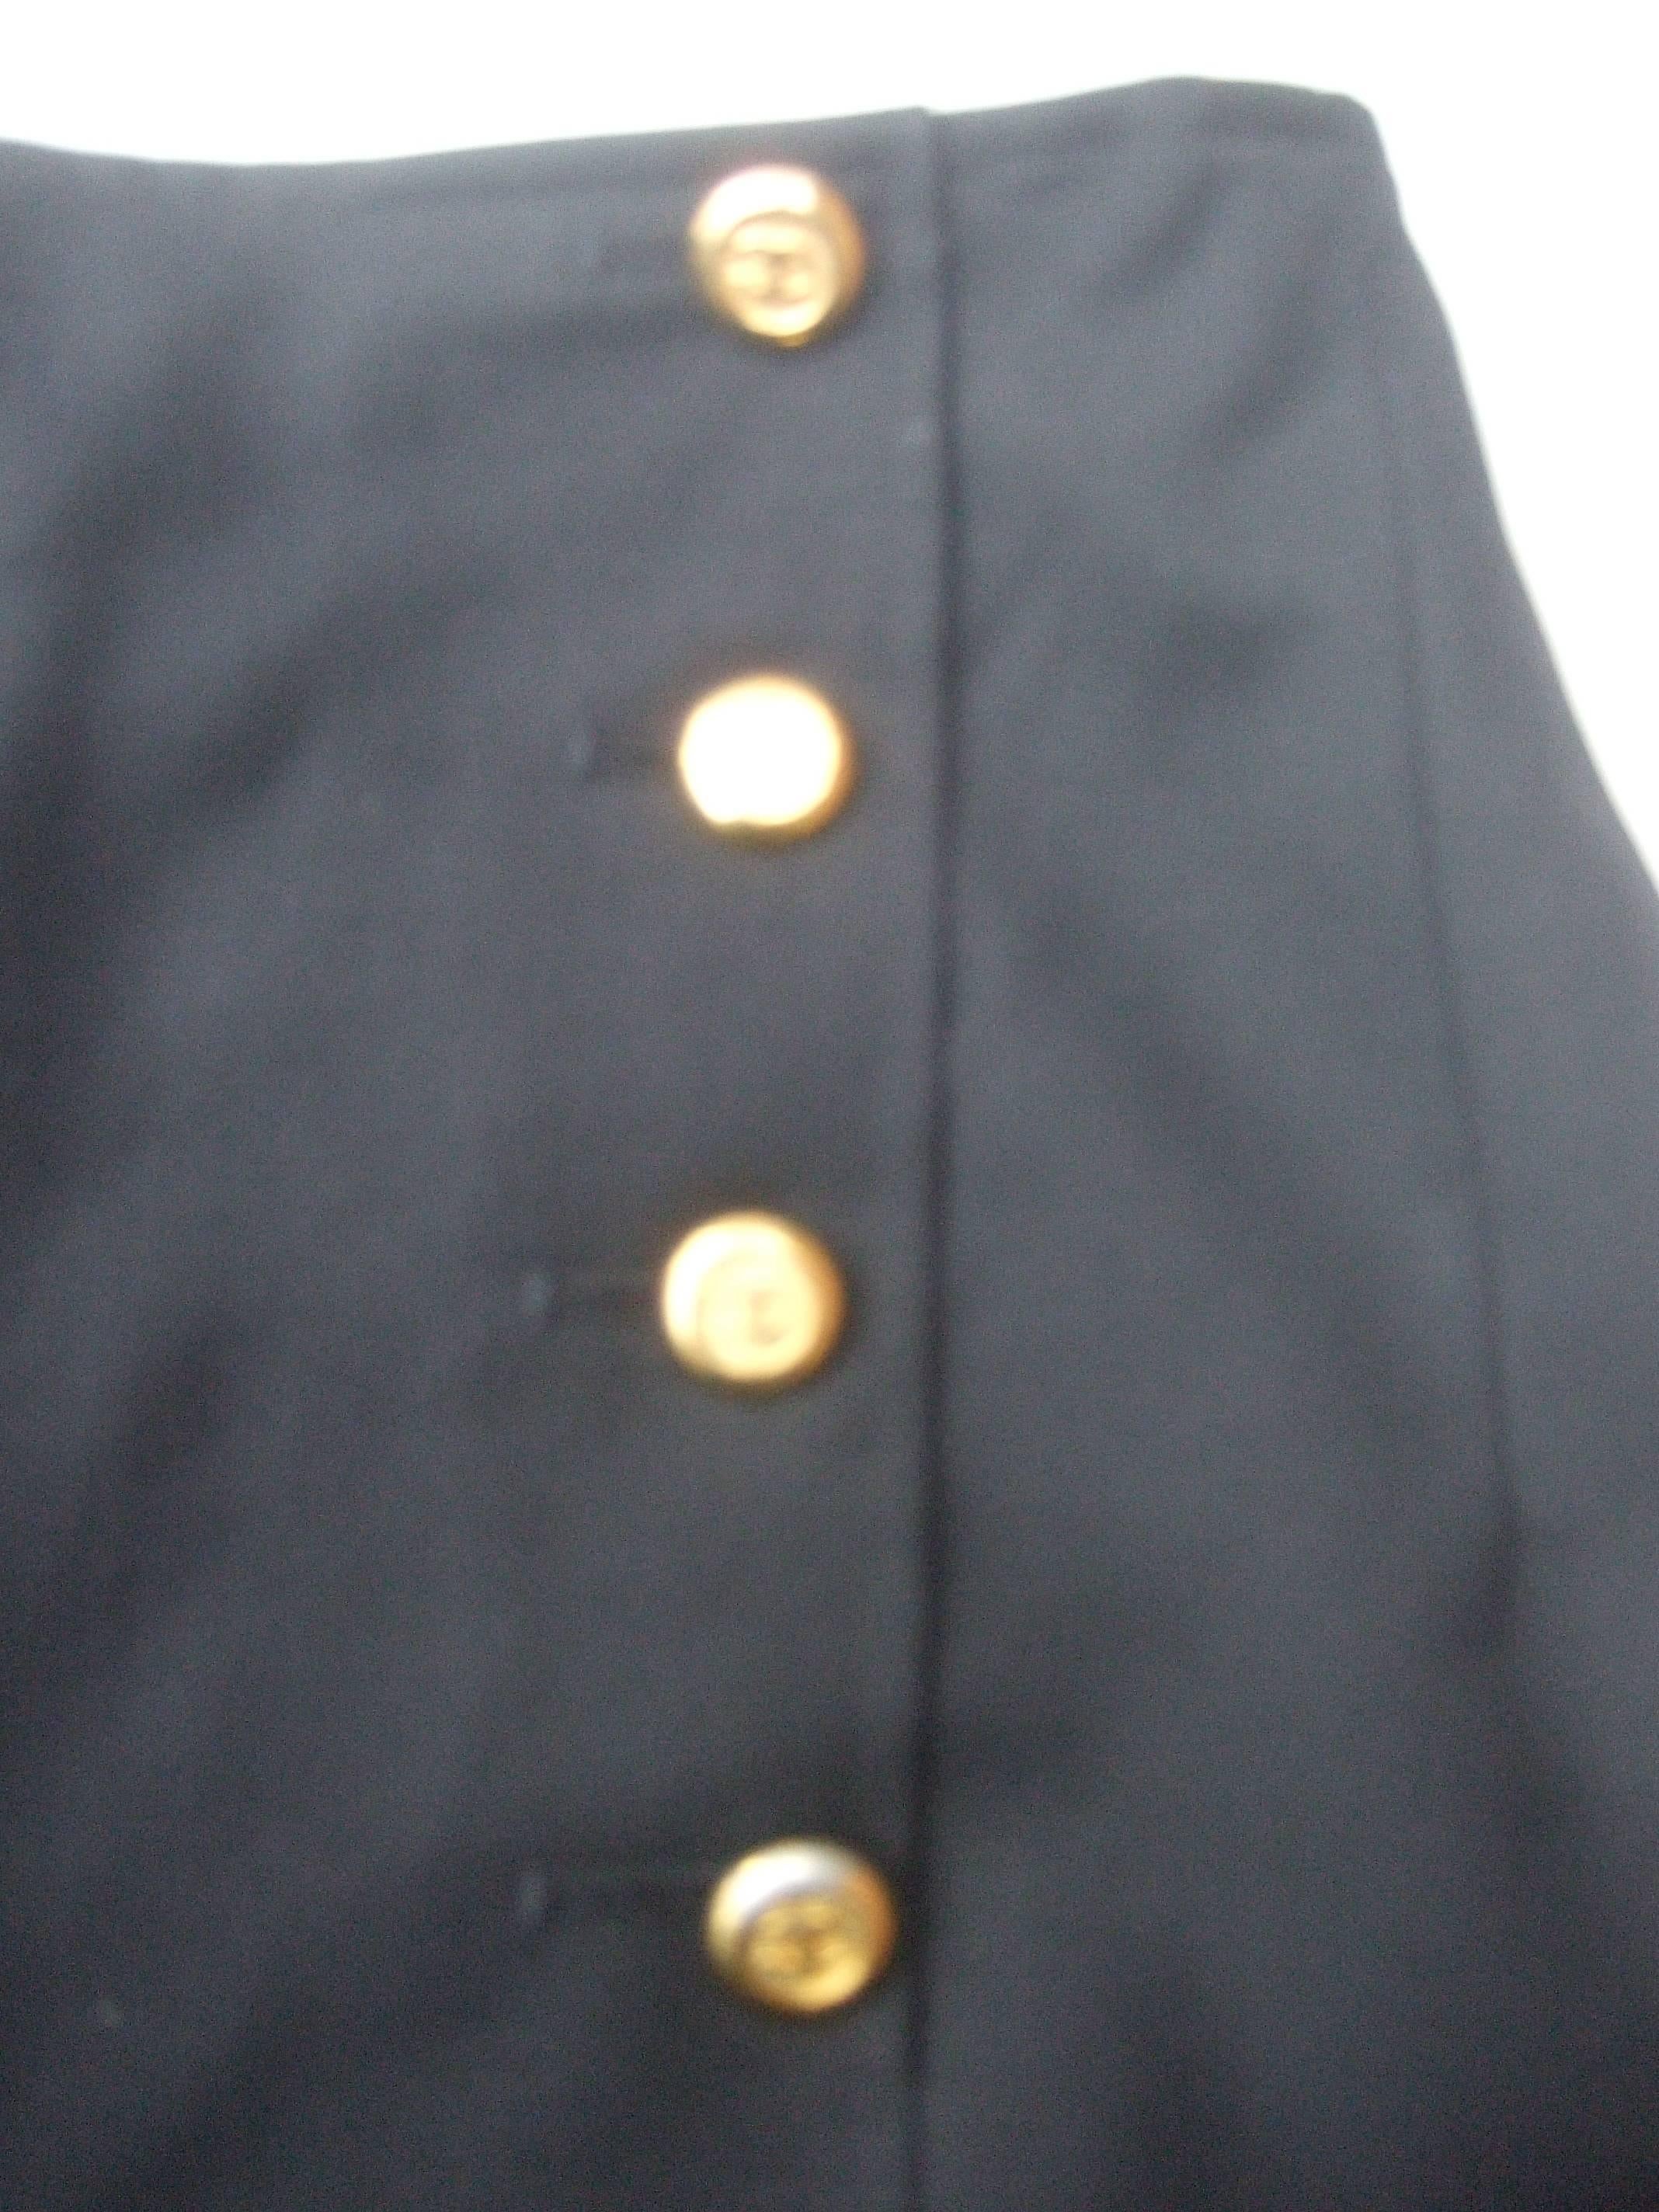 Chanel Boutique Dark Blue Wool Pencil Skirt with Chanel Buttons c 1990s 1